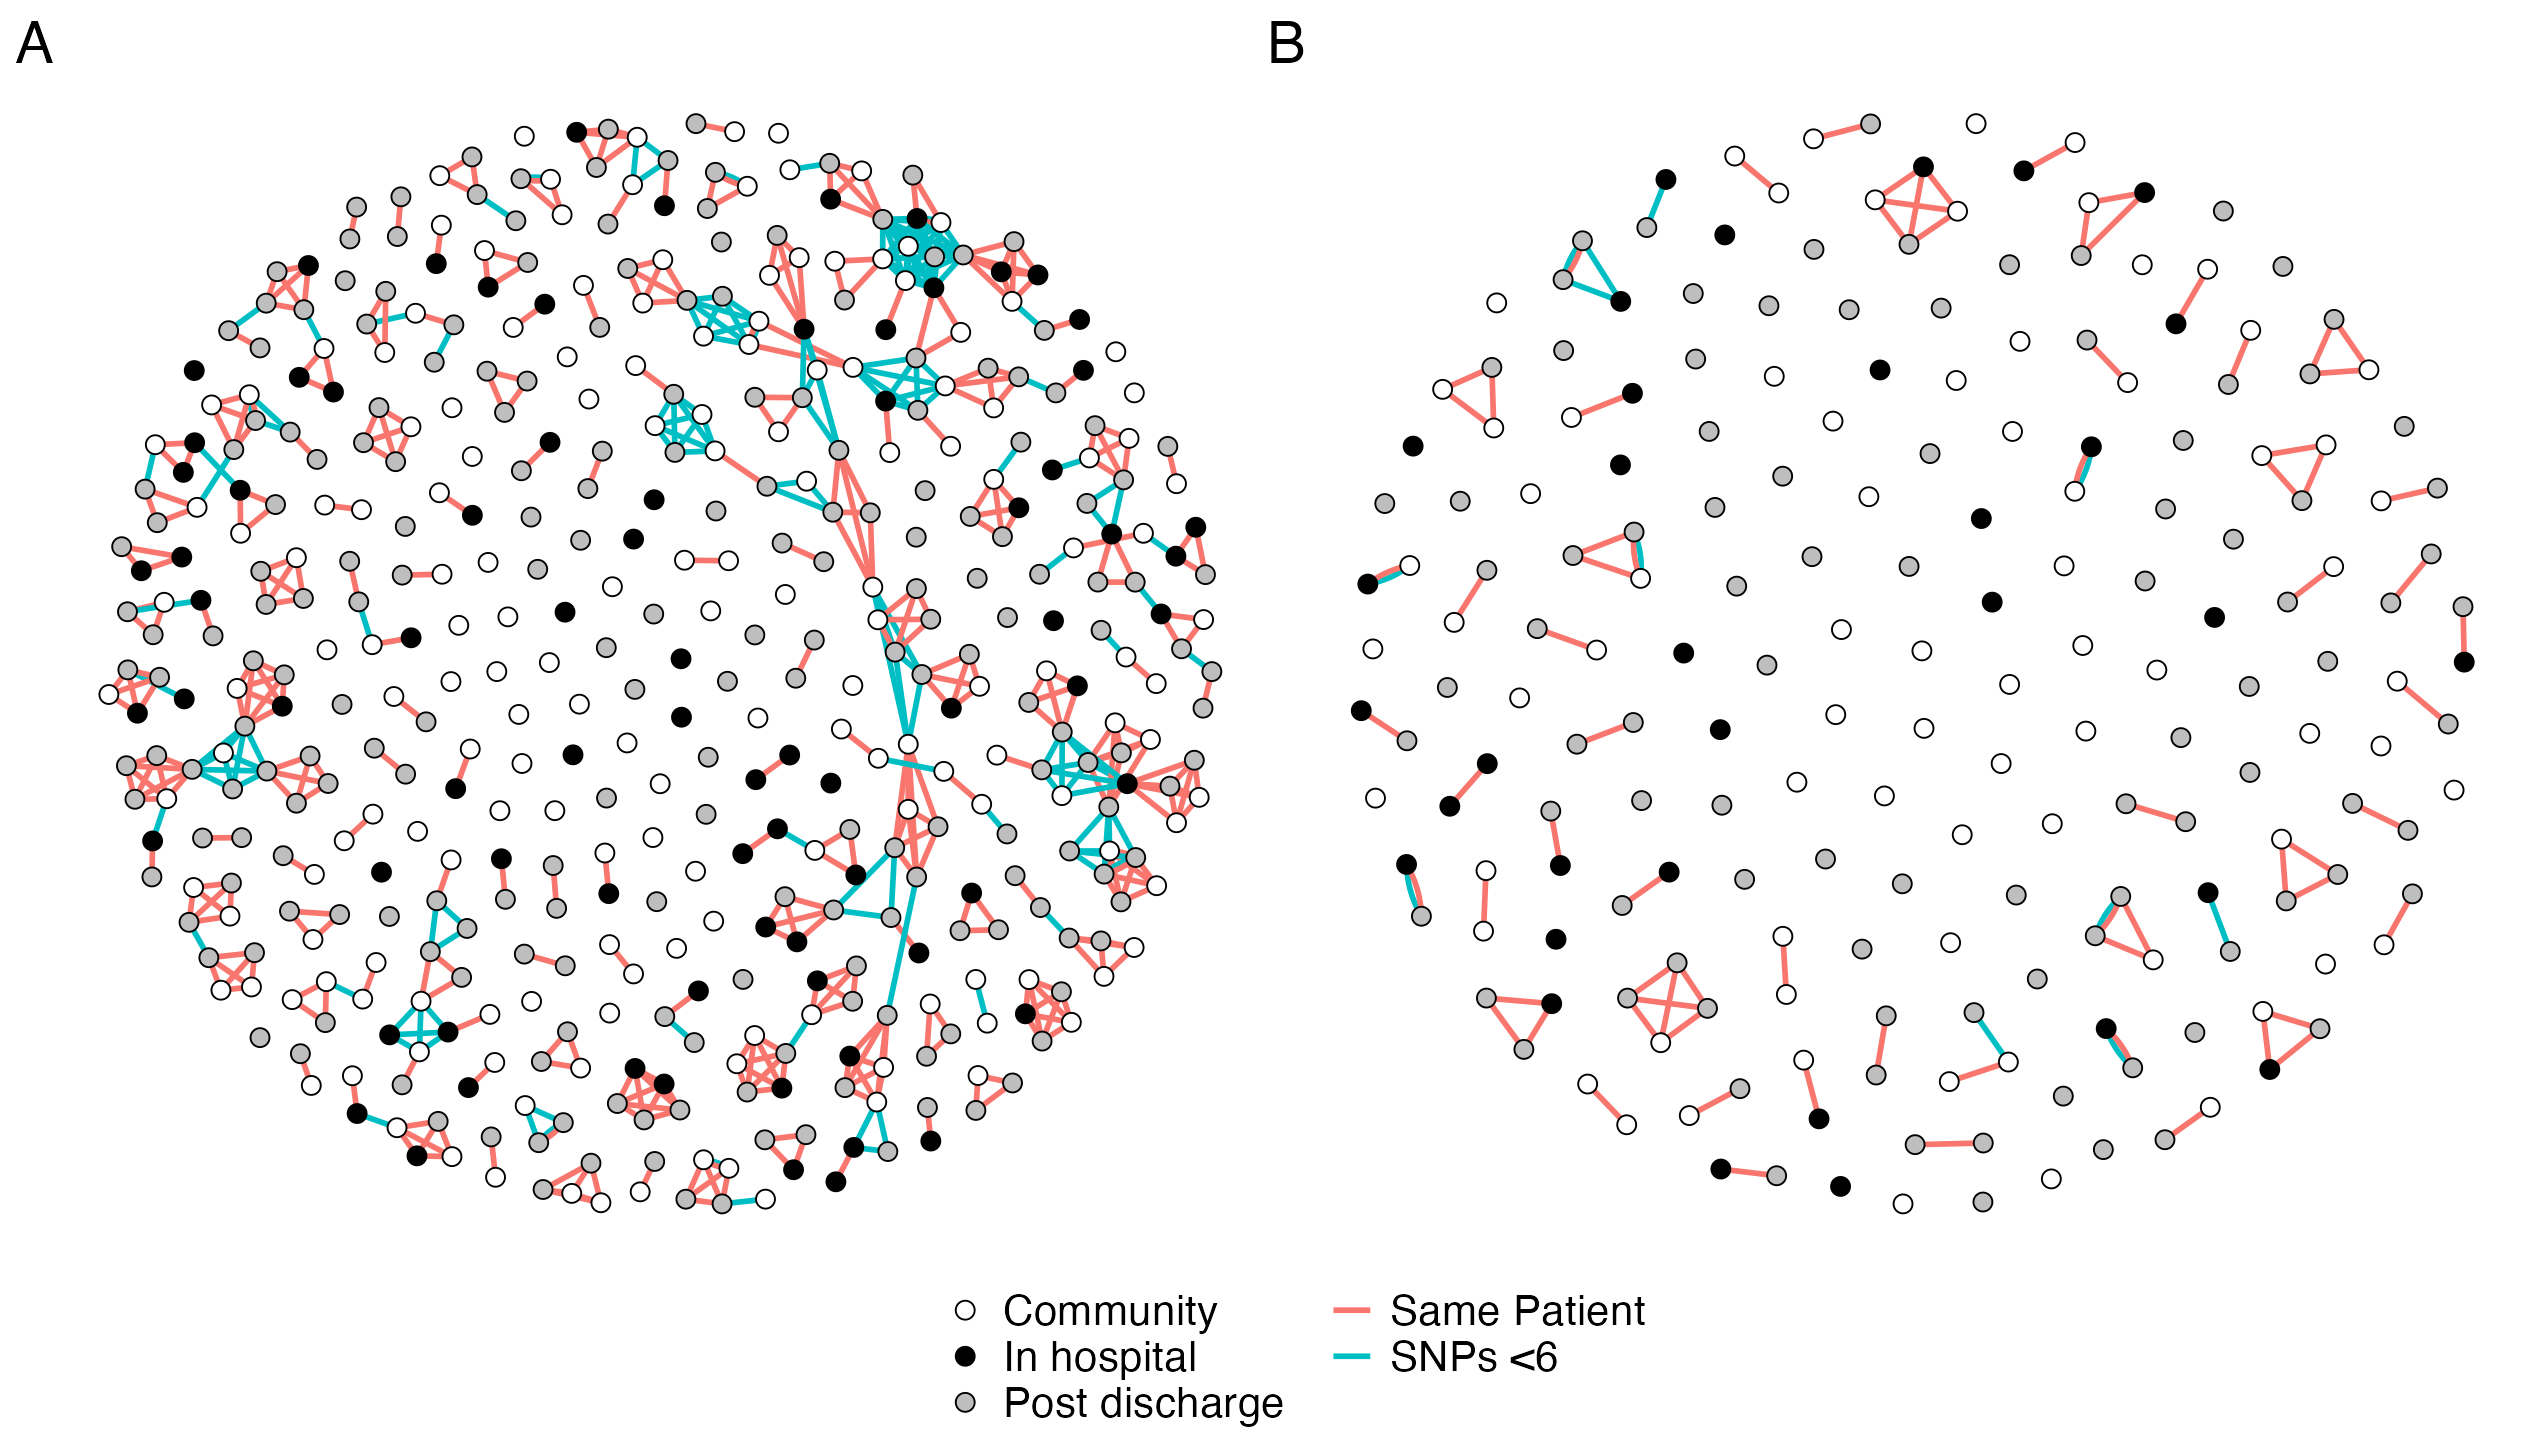 Network plot of SNP-clusters (i.e. putative transmission clusters) for E. coli (A) and K. pneumoniae (B) showing that putative transmission clusters are not purely hospital associated. Points are samples, coloured by place of isolation (in-hospital [black], community [white], or up to 120 days post-discharge [grey]). Red lines link samples that are within a single participant. Blue lines link samples that are differ by five or fewer SNPs. The plot shows that most samples are not members of a SNP-cluster; that most SNP clusters are made up of samples from different participants (rather than multiple samples from the same participant); and that SNP-clusters are not strongly hospital-associated (i.e. they contain black, white, and grey points).